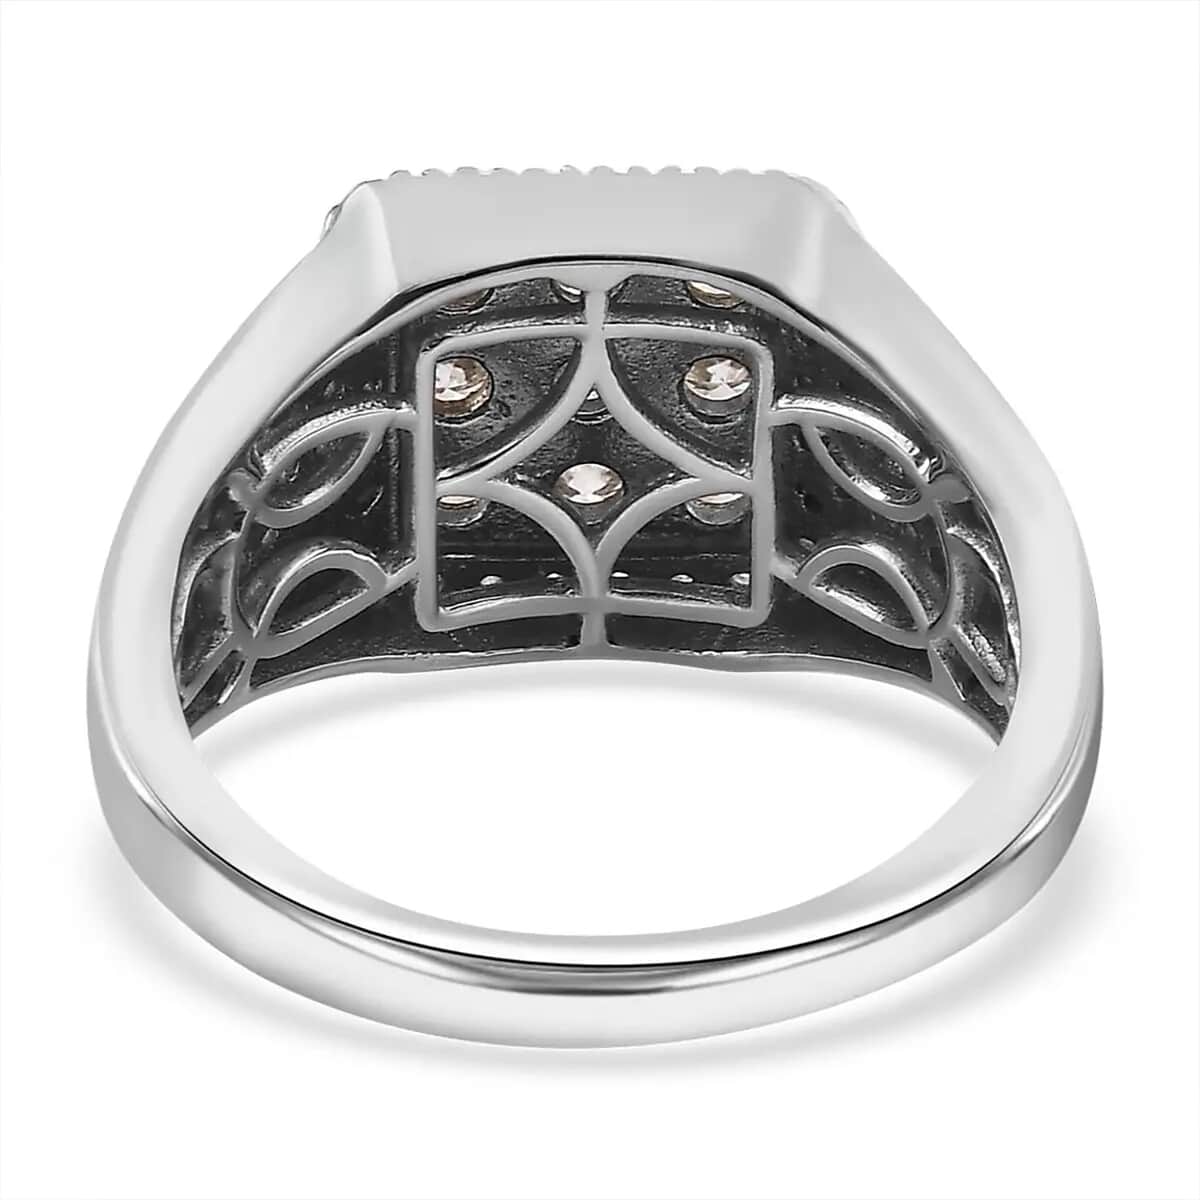 Doorbuster Moissanite Men's Ring in Platinum Over Sterling Silver (Size 9.0) (Del. in 5-7 Days) 2.35 ctw image number 9